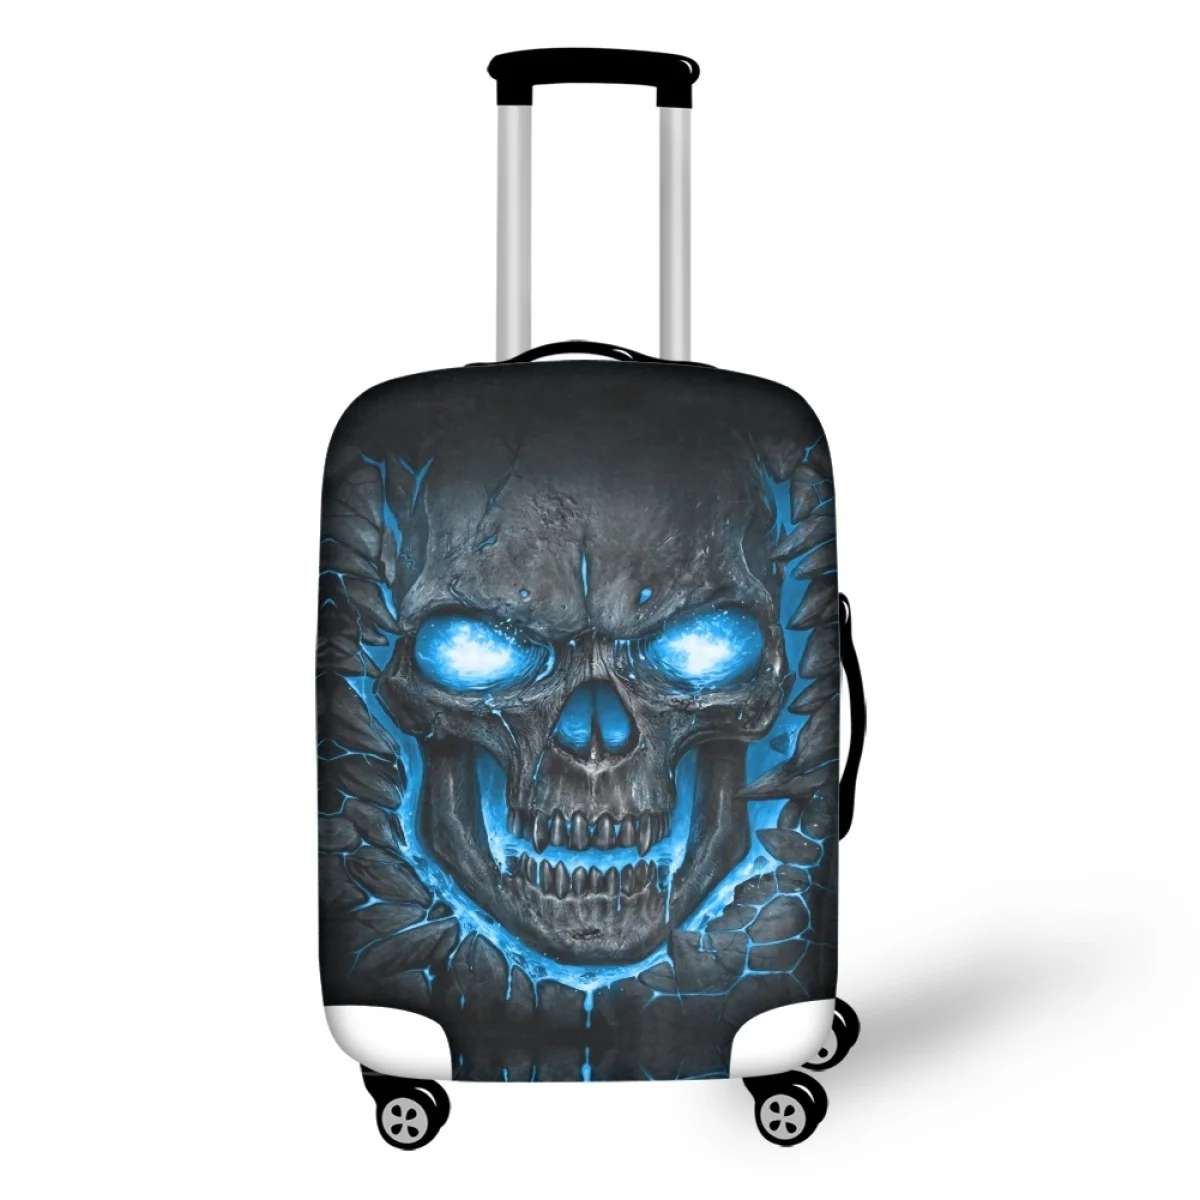 

Twoheartsgirl Cool Skull Print Suitcase Cover Stretchable Durable Luggage Covers with Zipper for Trolley Travel Case Accessories